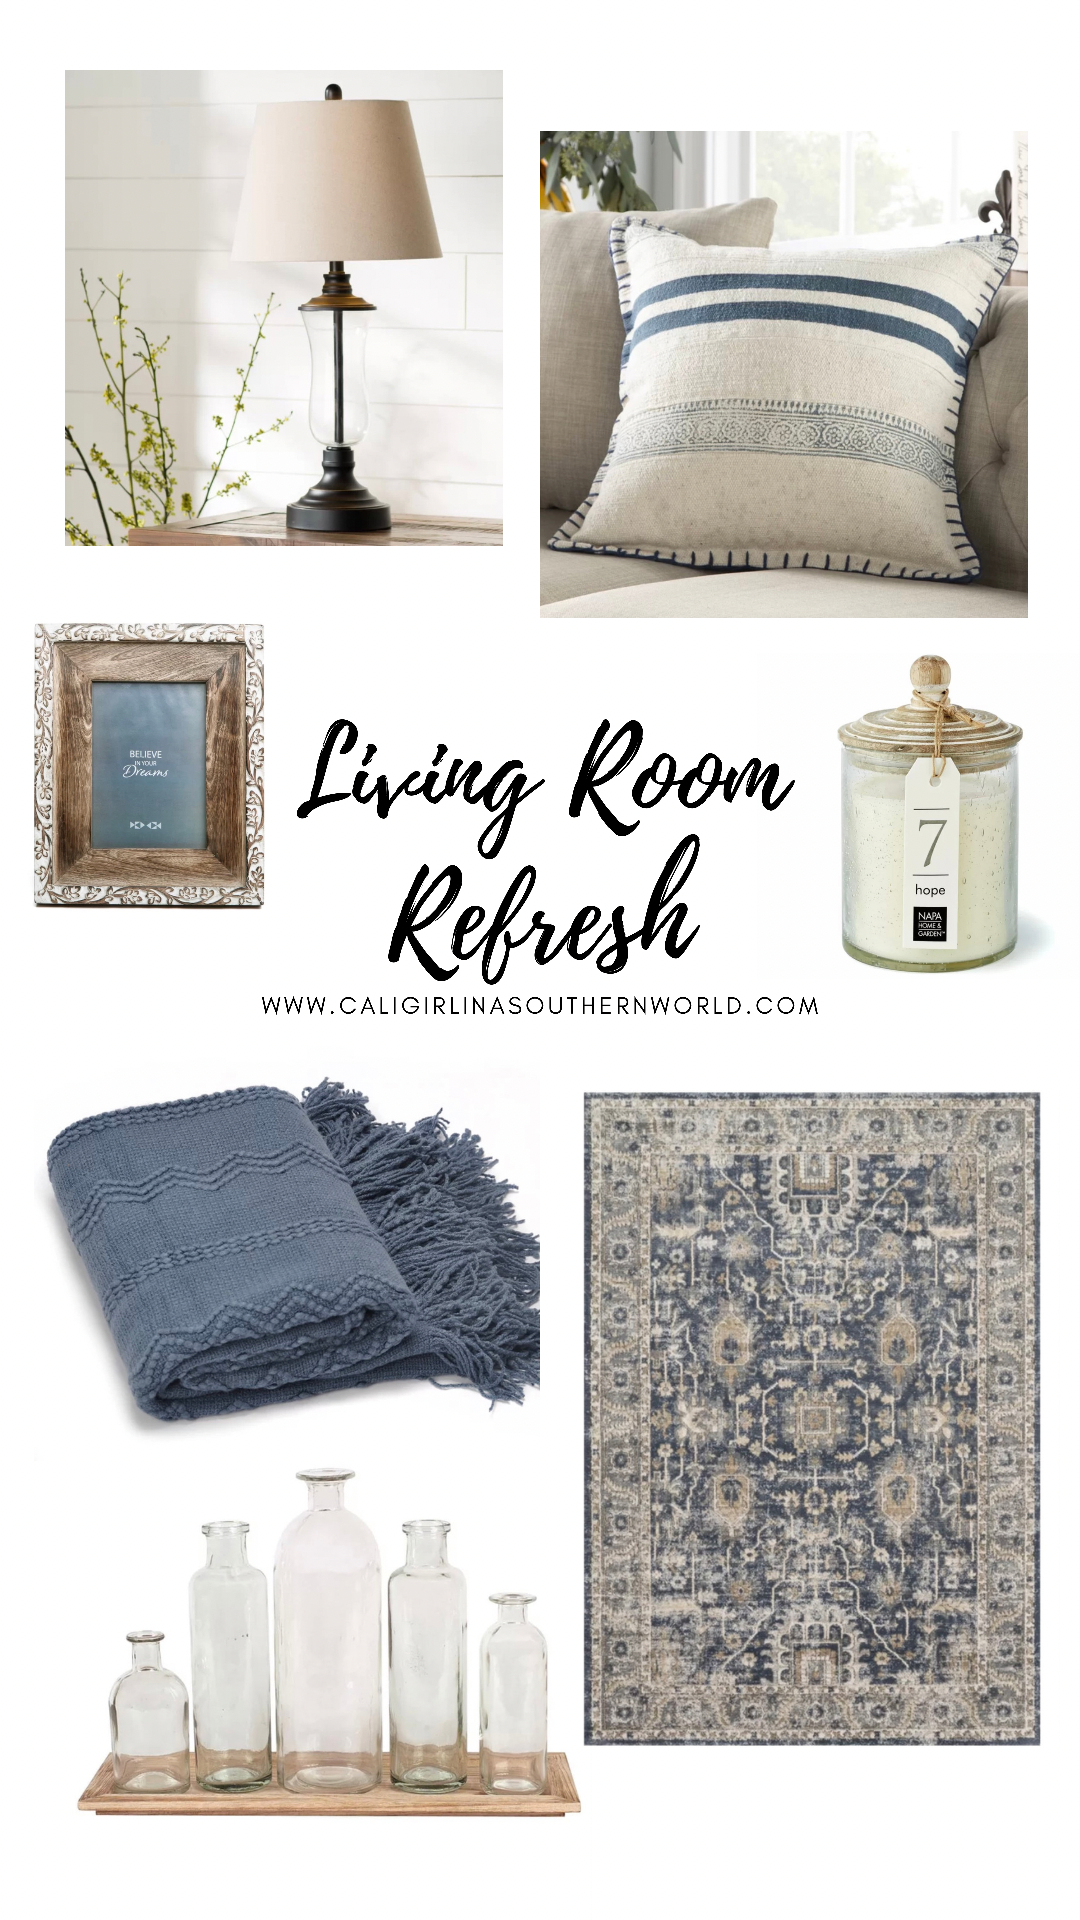 Mood board with living room refresh home decor inspiration including a pillow, picture frame, candle, rug, lamp and blanket.